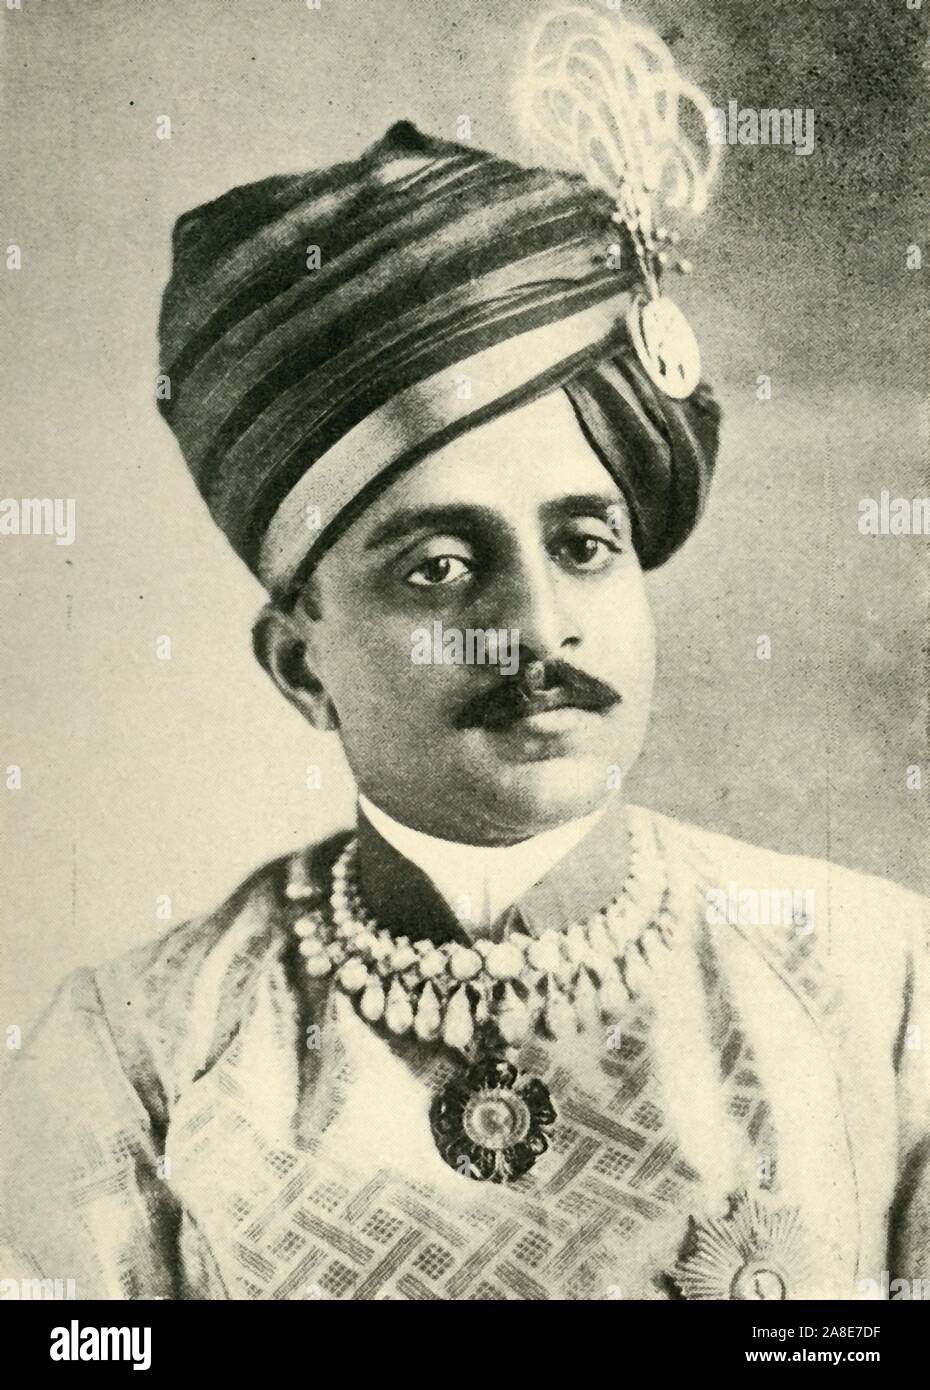 'The Maharajah of Mysore', c1905, (c1920). Portrait of Yuvaraja Sri Sir Kanteerava Narasimharaja Wadiyar (1888-1940), the heir apparent of the princely state of Mysore in India. From &quot;The Great World War: A History&quot;, Volume V, edited by Frank A Mumby. [The Gresham Publishing Company Ltd, London, c1920] Stock Photo